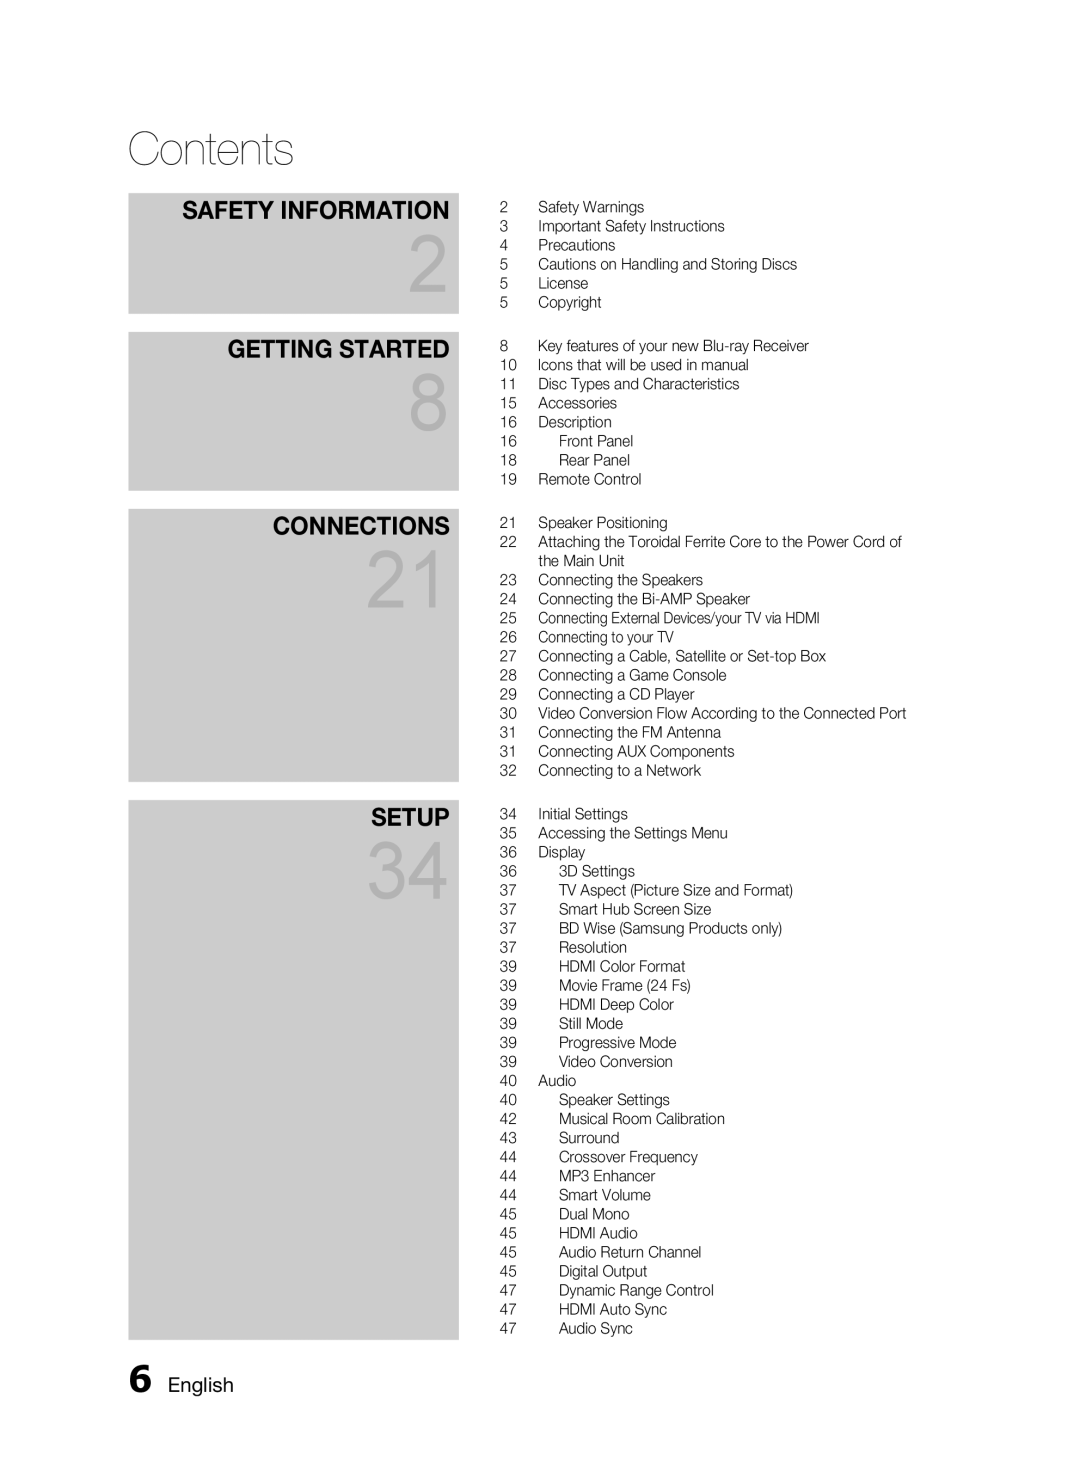 Samsung HW-D7000 user manual Contents, Getting Started, Connections, Setup, Safety Information 